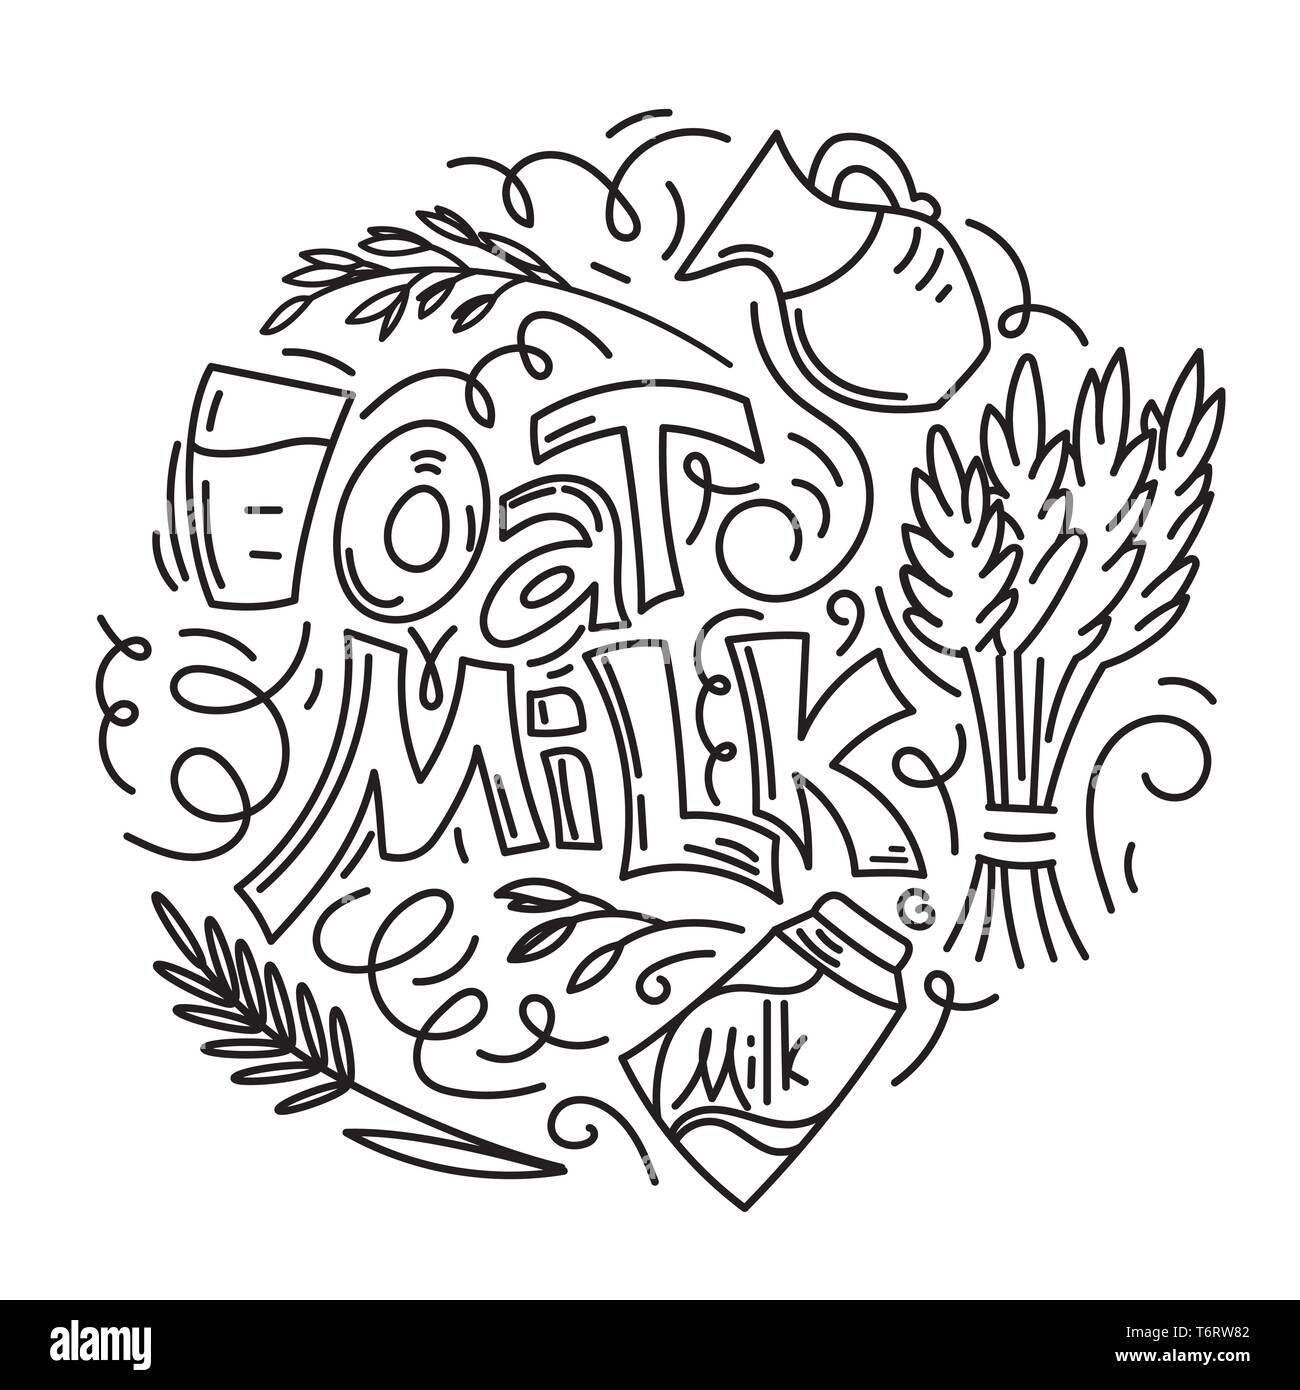 Oat milk hand drawn lettering. Spikes and grains of oats, glass with oat milk, carton box and glass jar of milk. Doodle style, linear, black and white, vector illustration. Stock Vector